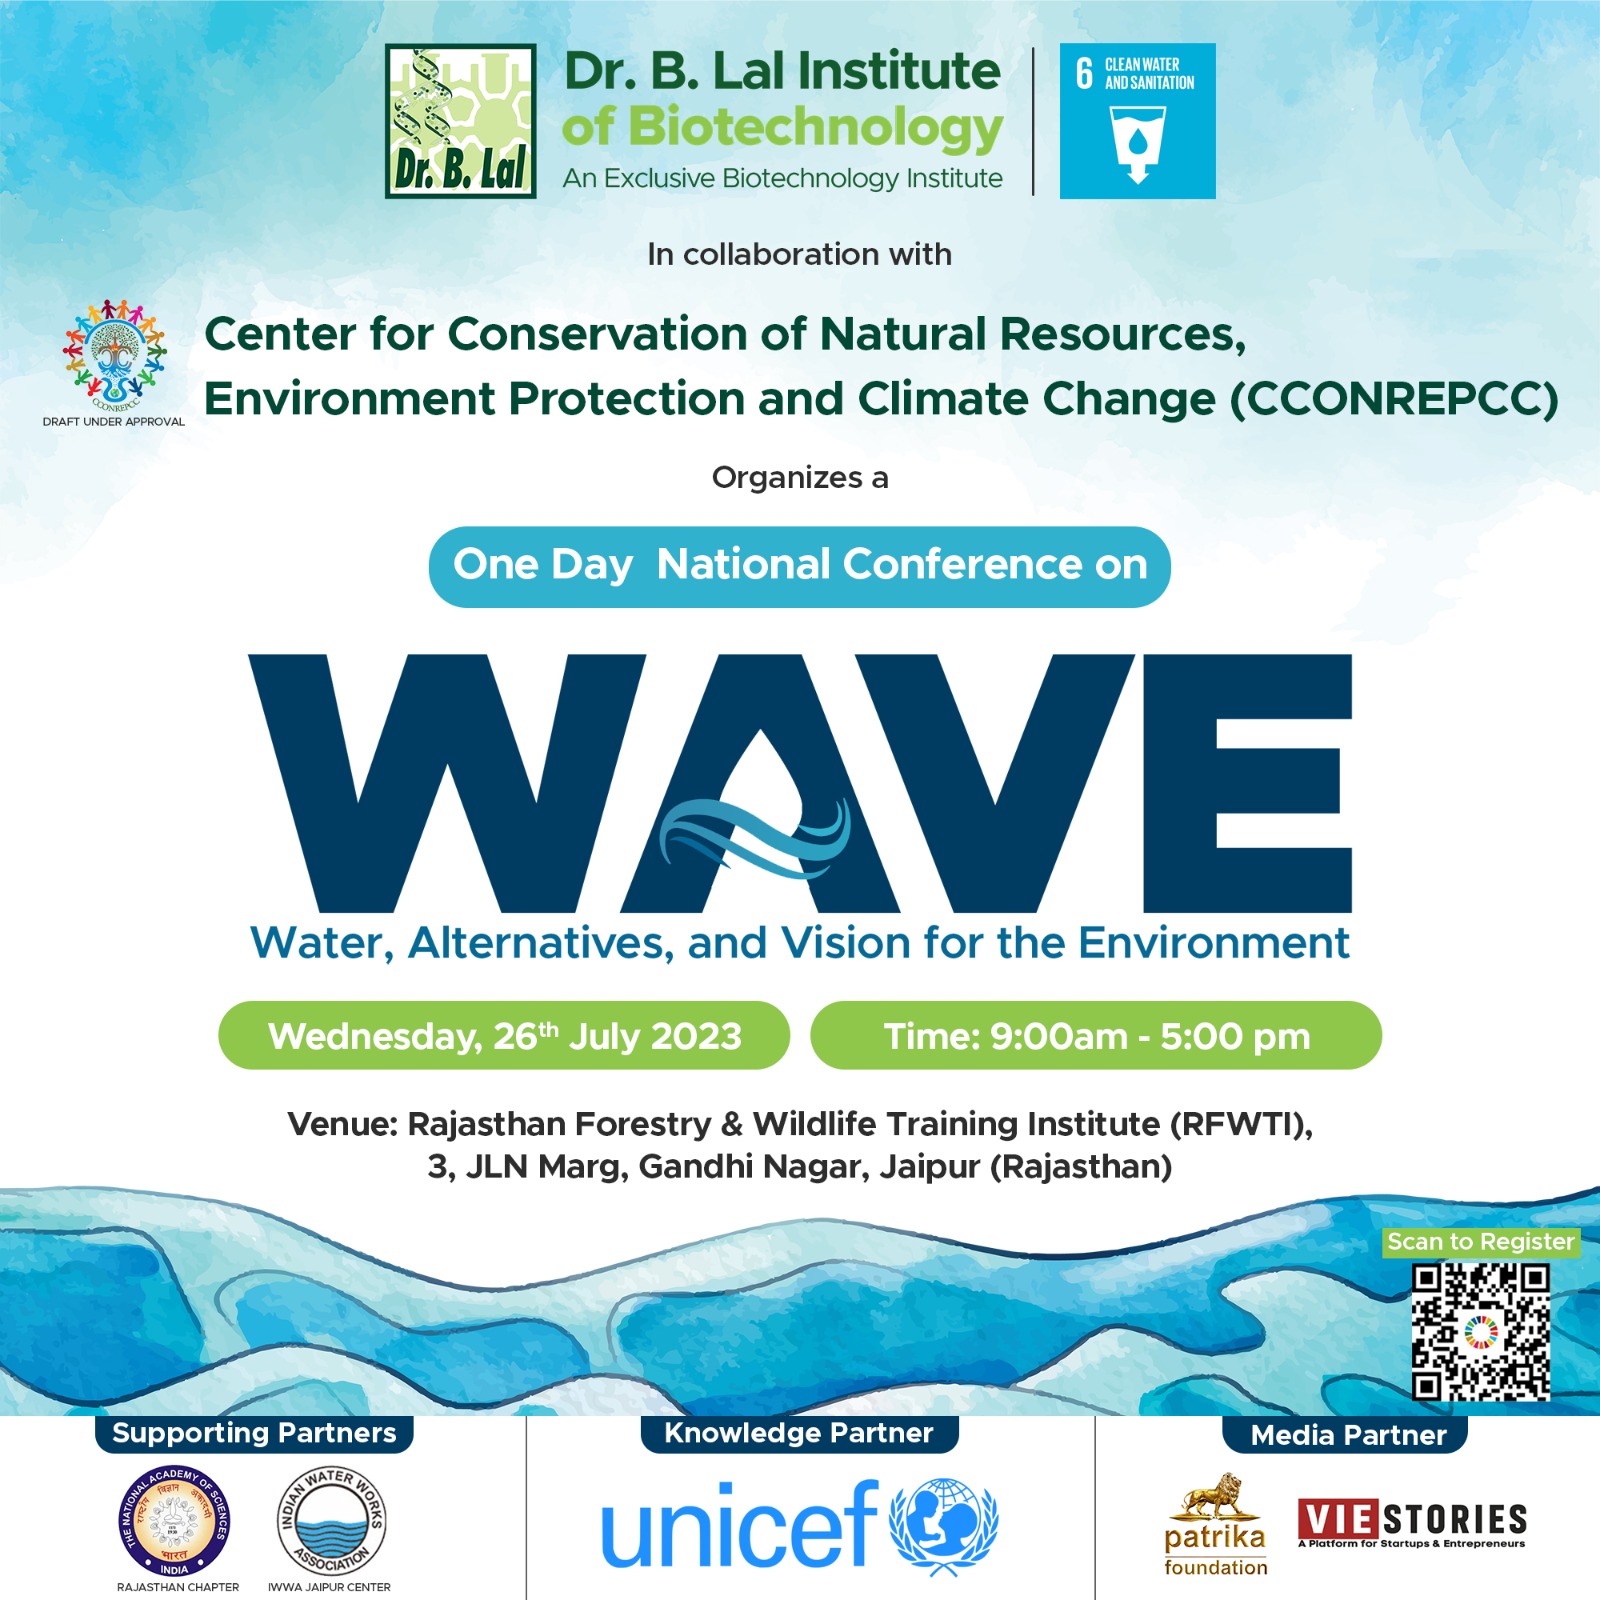 One Day National Conference on WAVE: Water, Alternatives, and Vision for the Environment